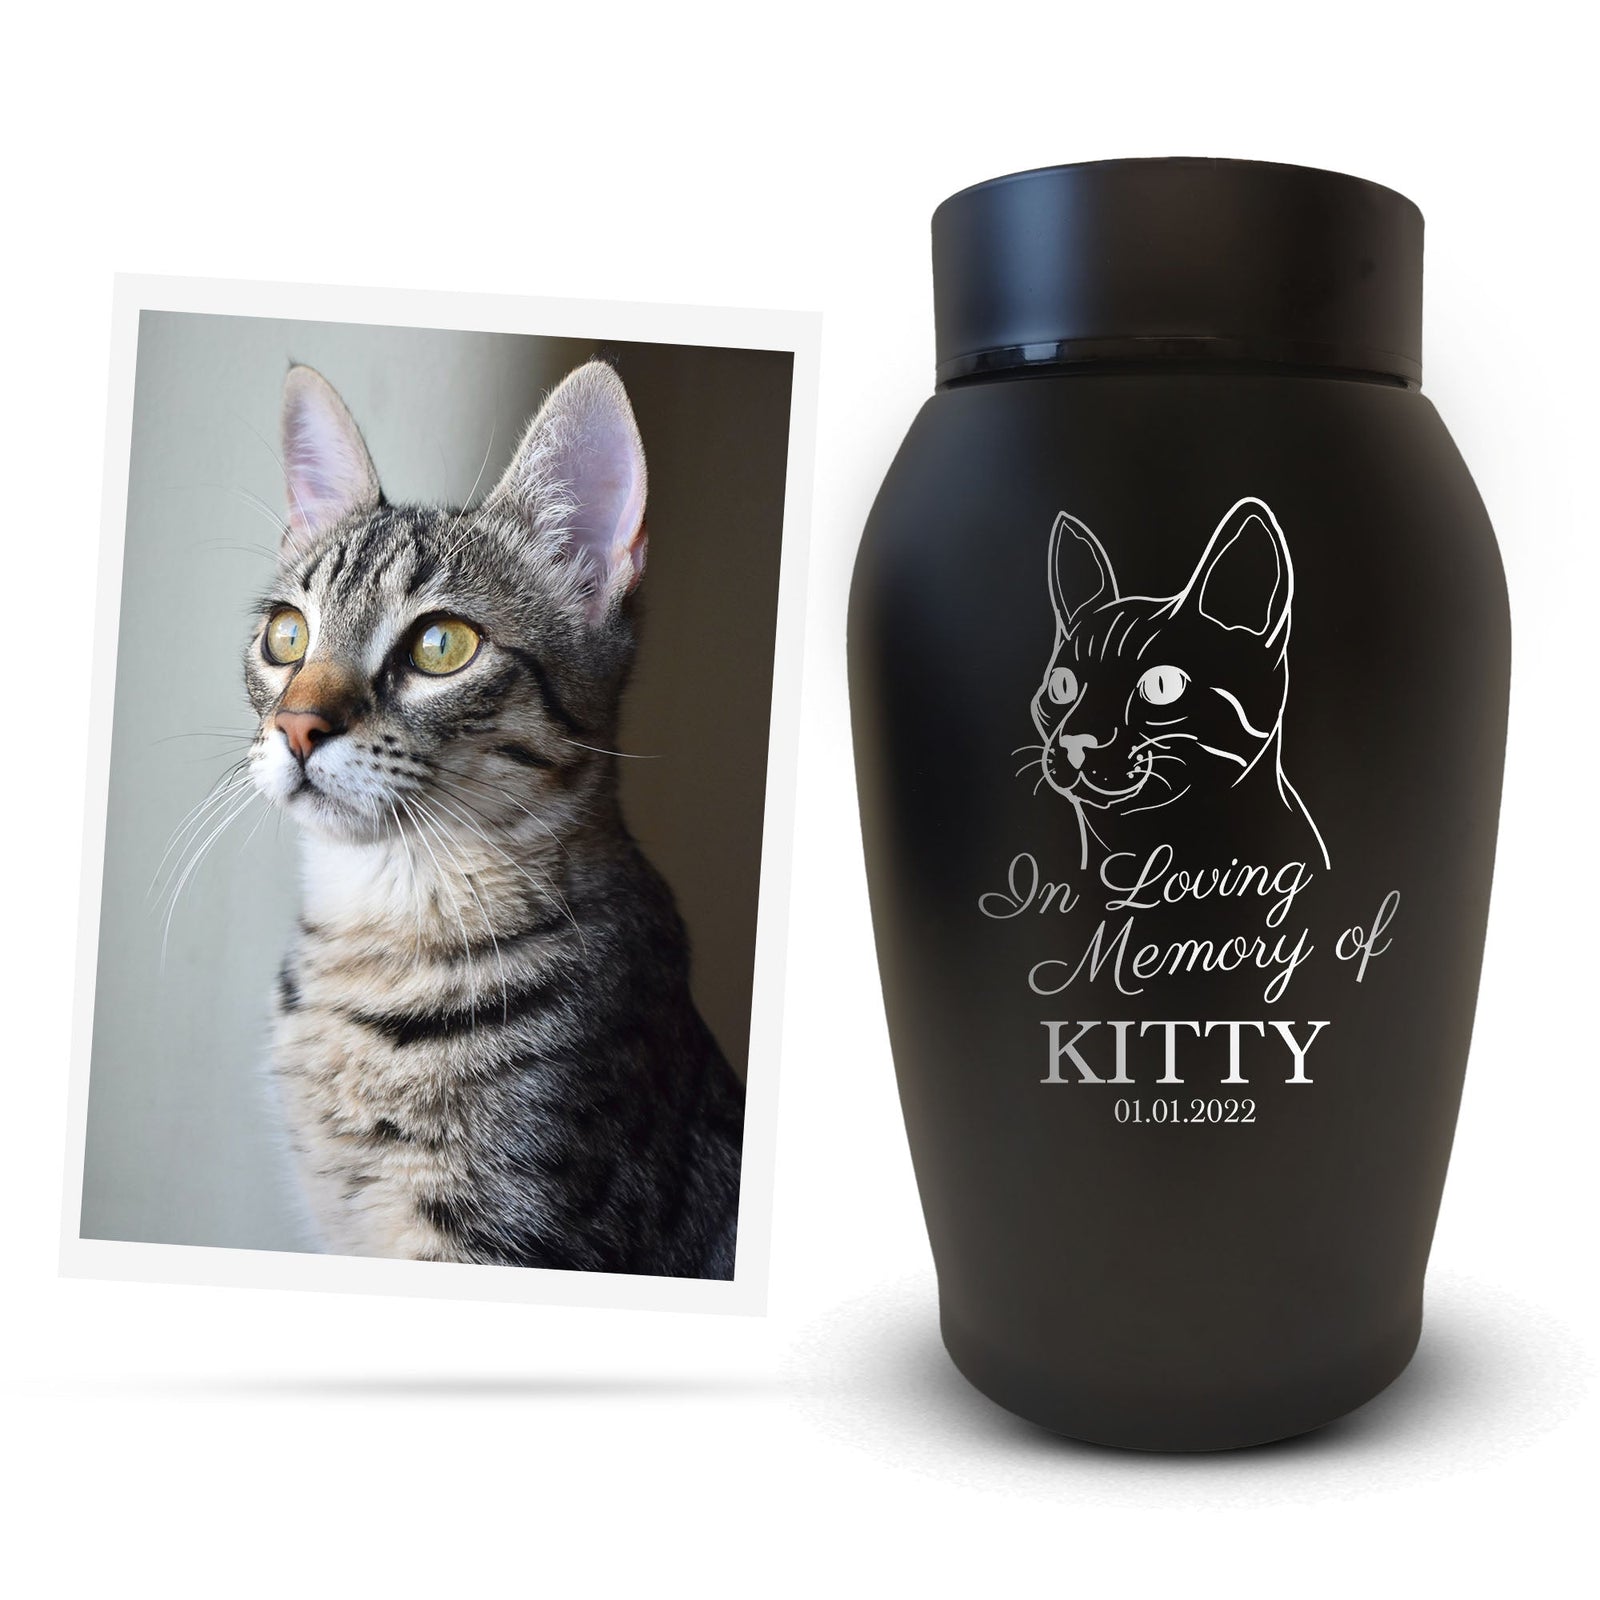 Custom Engraved Pet Urn: Personalized with Your Pet Photo/Image, Name, and Date - Stainless Steel Cremation Urns for Pets Ashes with Airtight Closure, Up to 50 Lbs Capacity | Black 5.2" x 3"